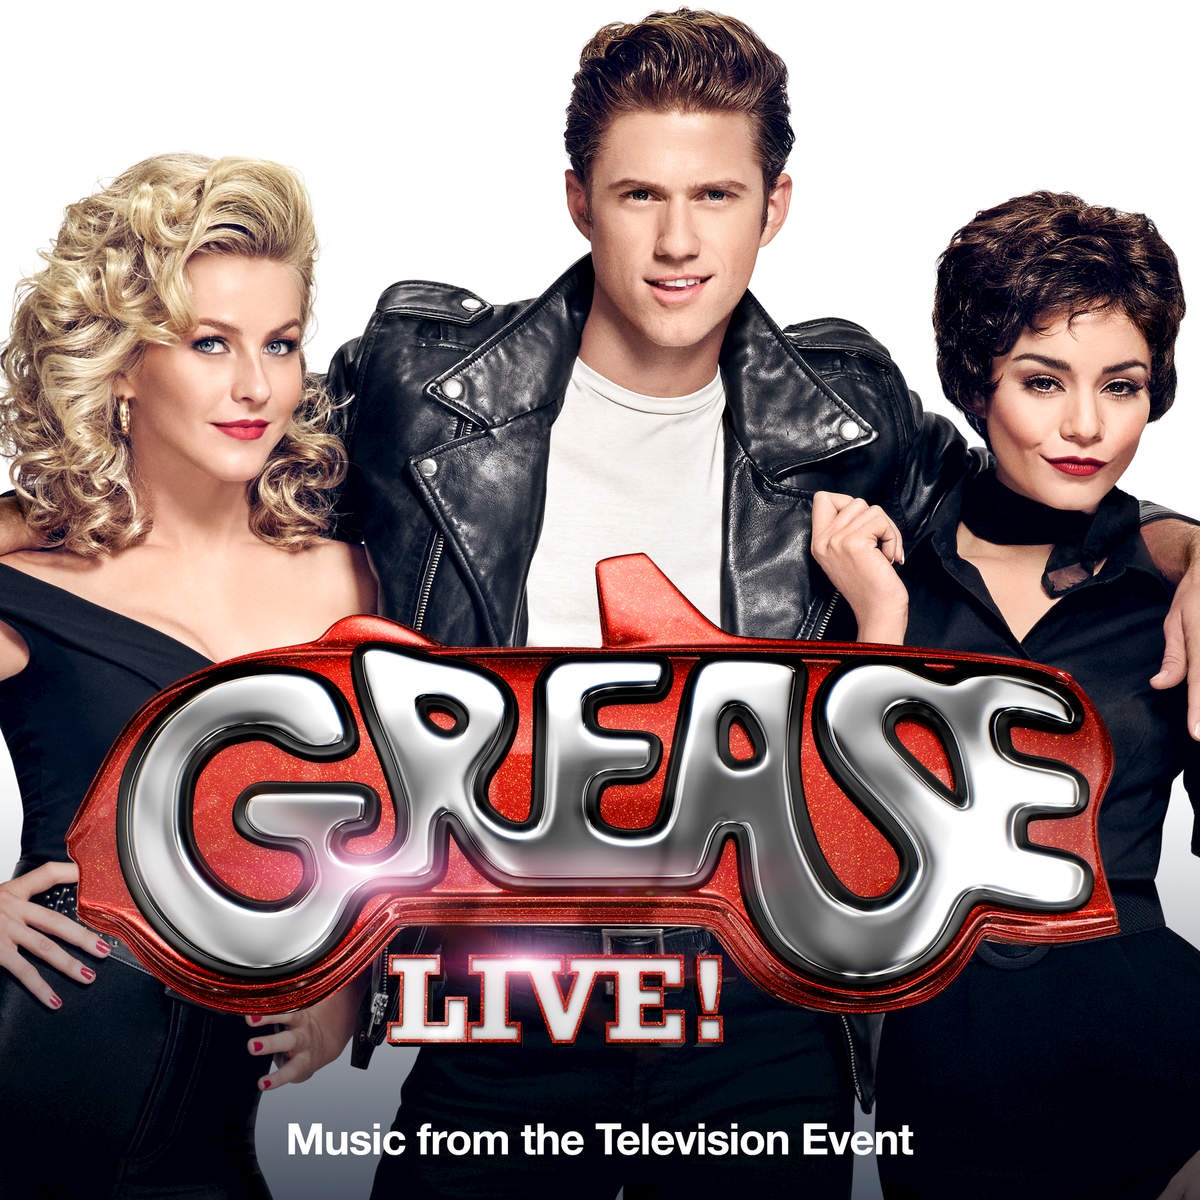 Grease (Is The Word) - From "Grease Live!" Music From The Television Event